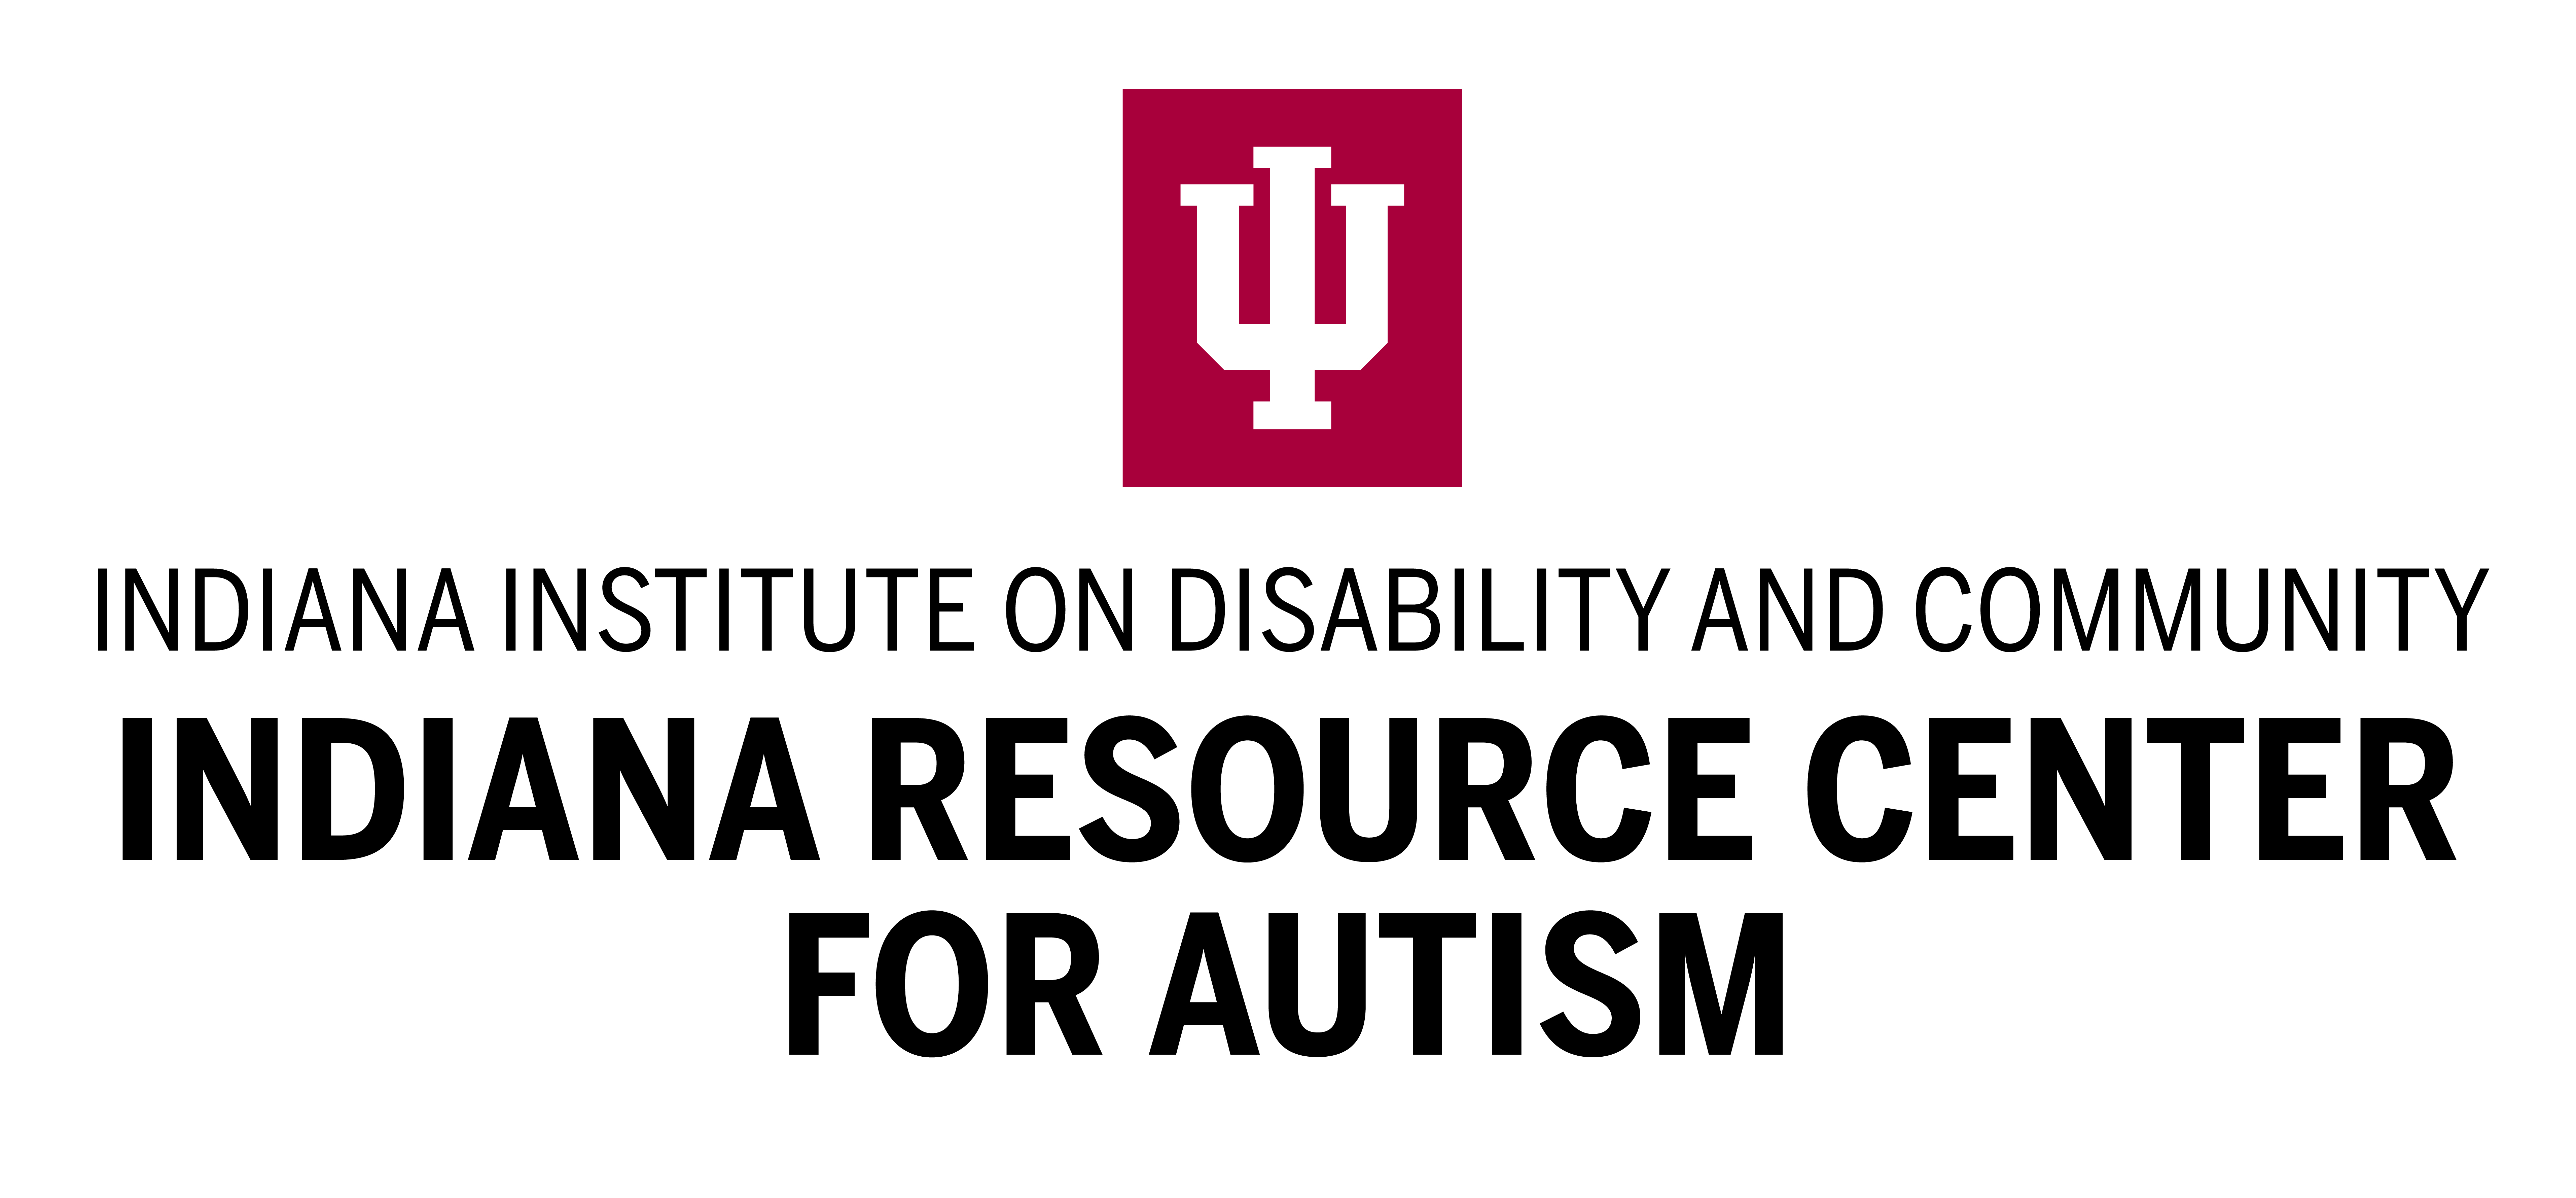 Indiana Resource Center for Autism logo